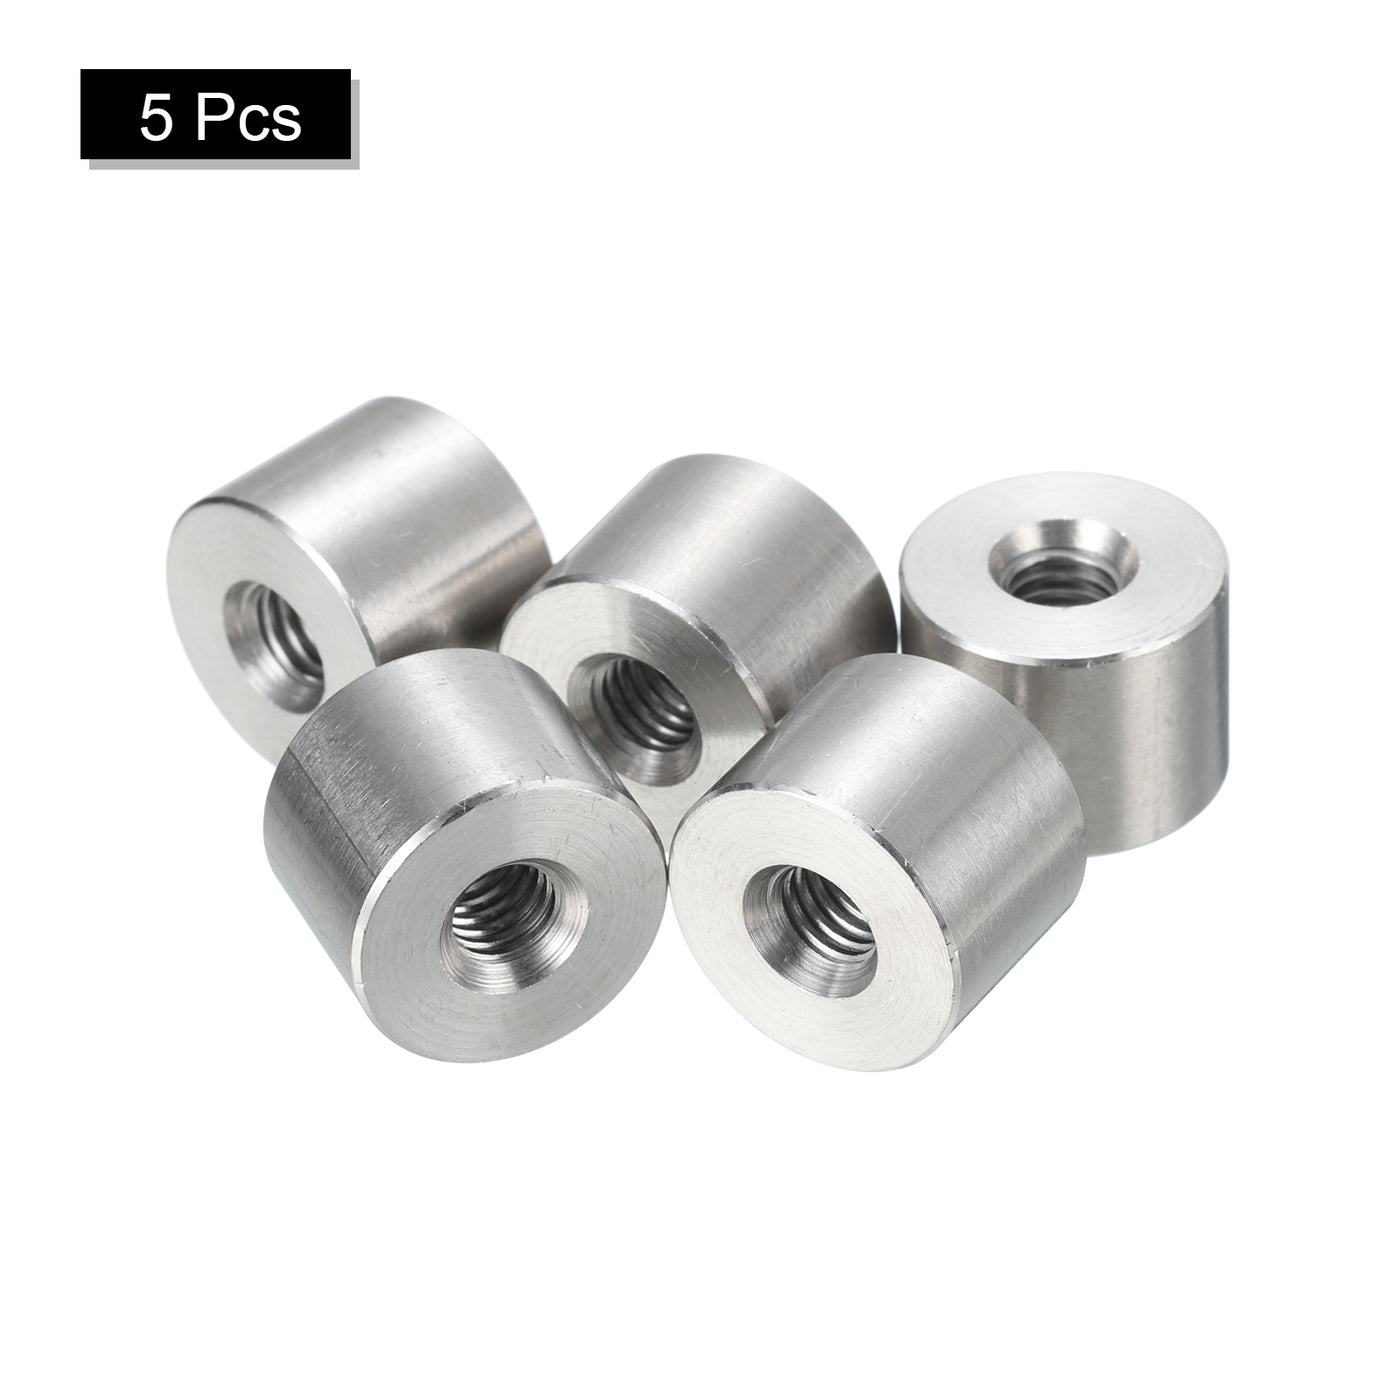 uxcell Uxcell 5Pcs Round Connector Nuts, M6x12x16mm Coupling Nut Sleeve Rod Bar Stud Nut